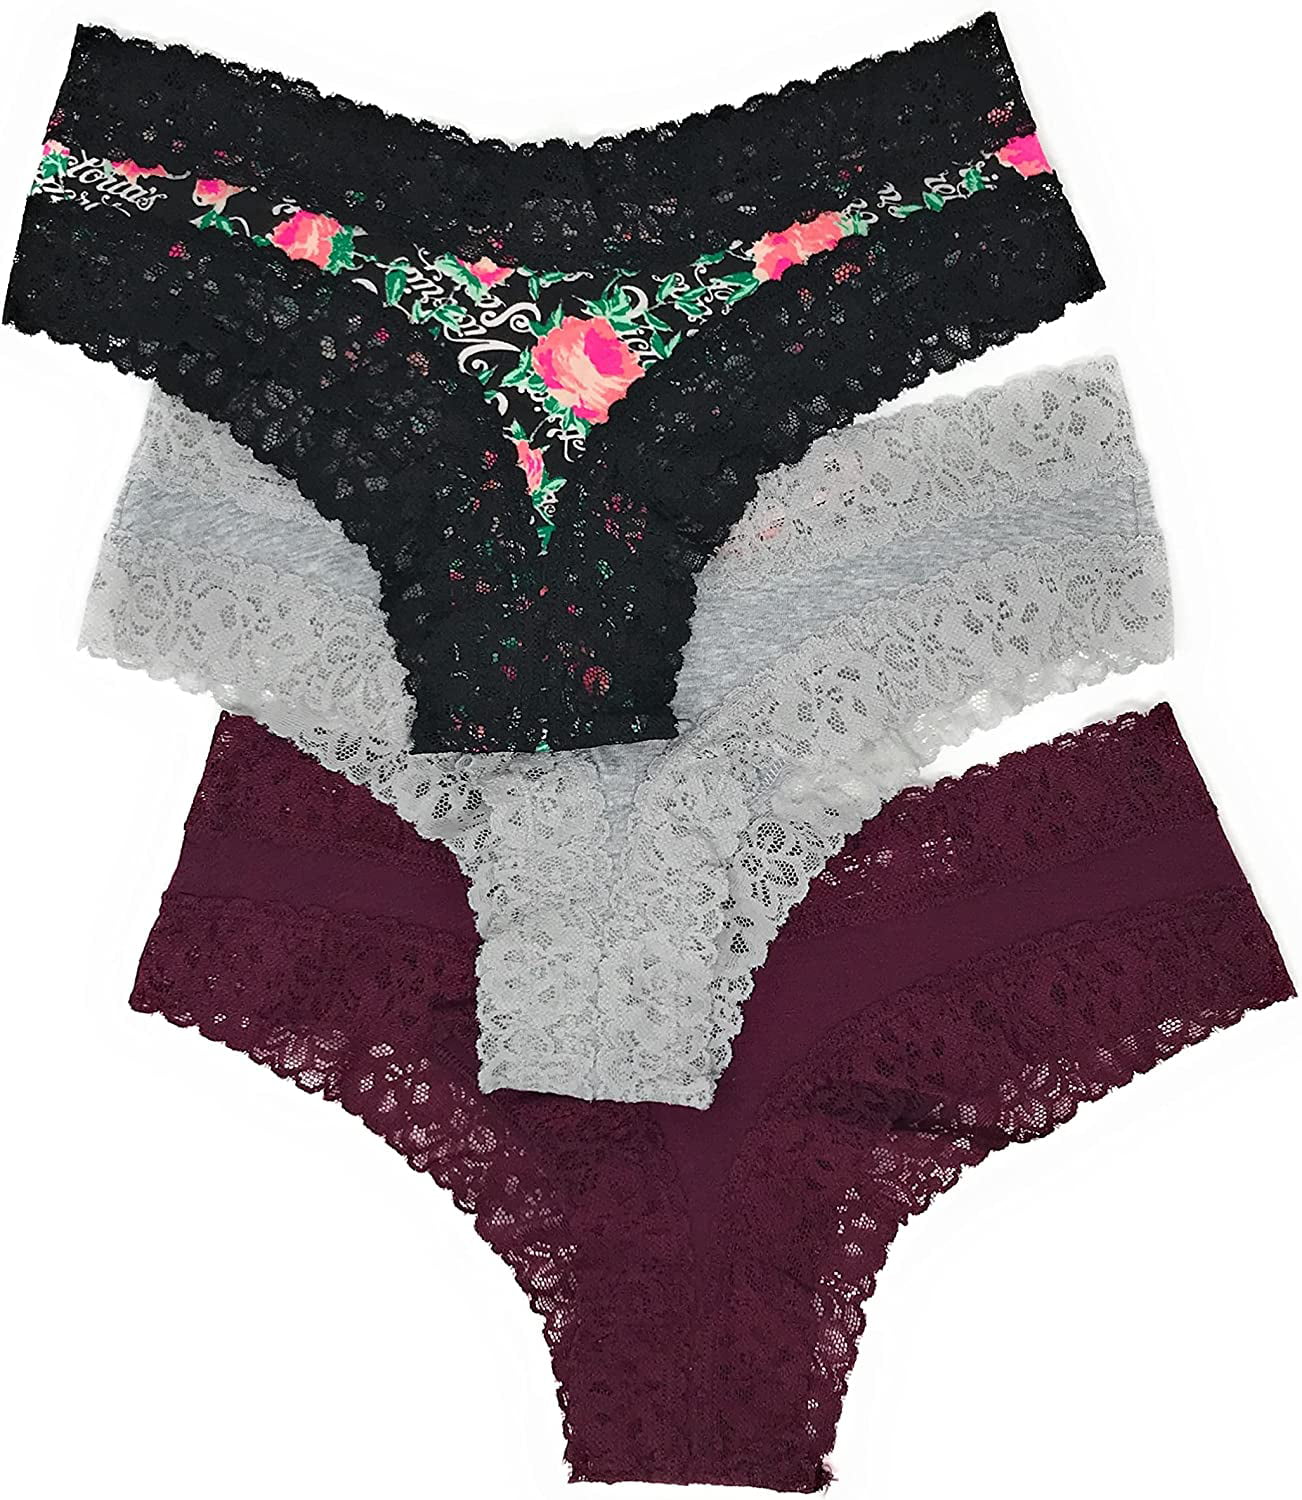 Buy Icon by Victoria's Secret Lace Cheeky Panty Online